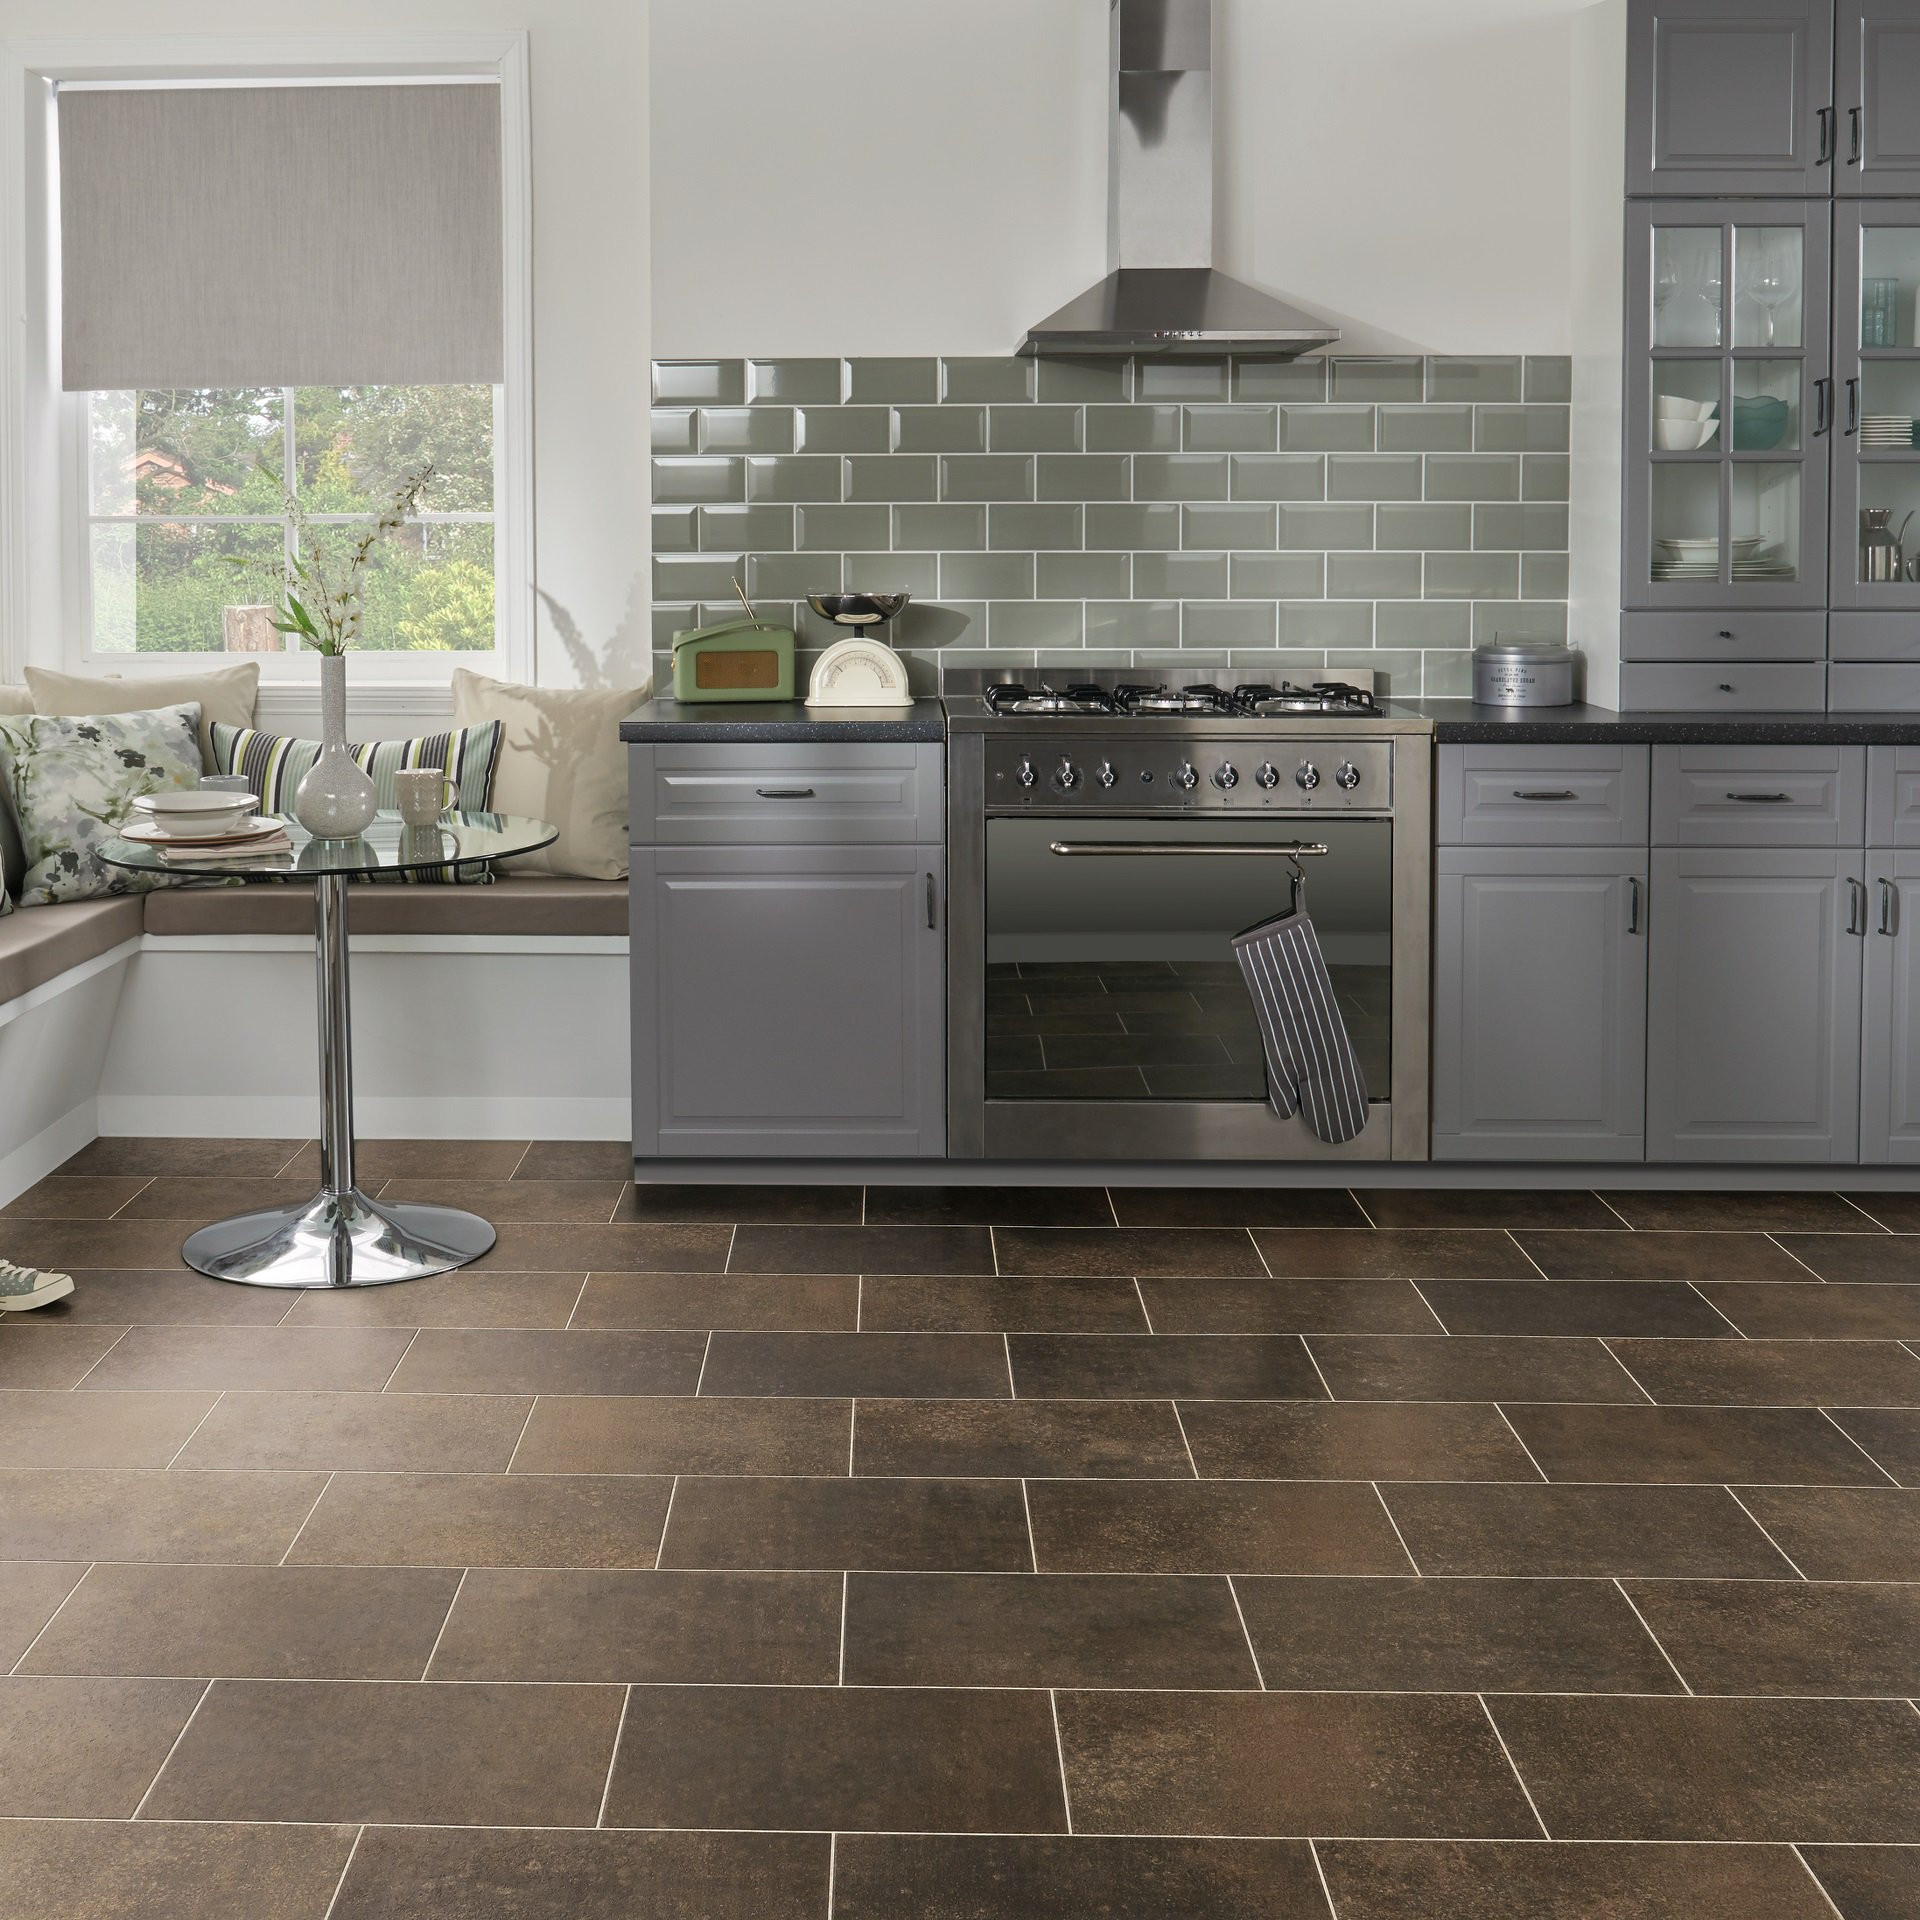 Floor In Kitchen
 Kitchen Flooring Tiles and Ideas for Your Home